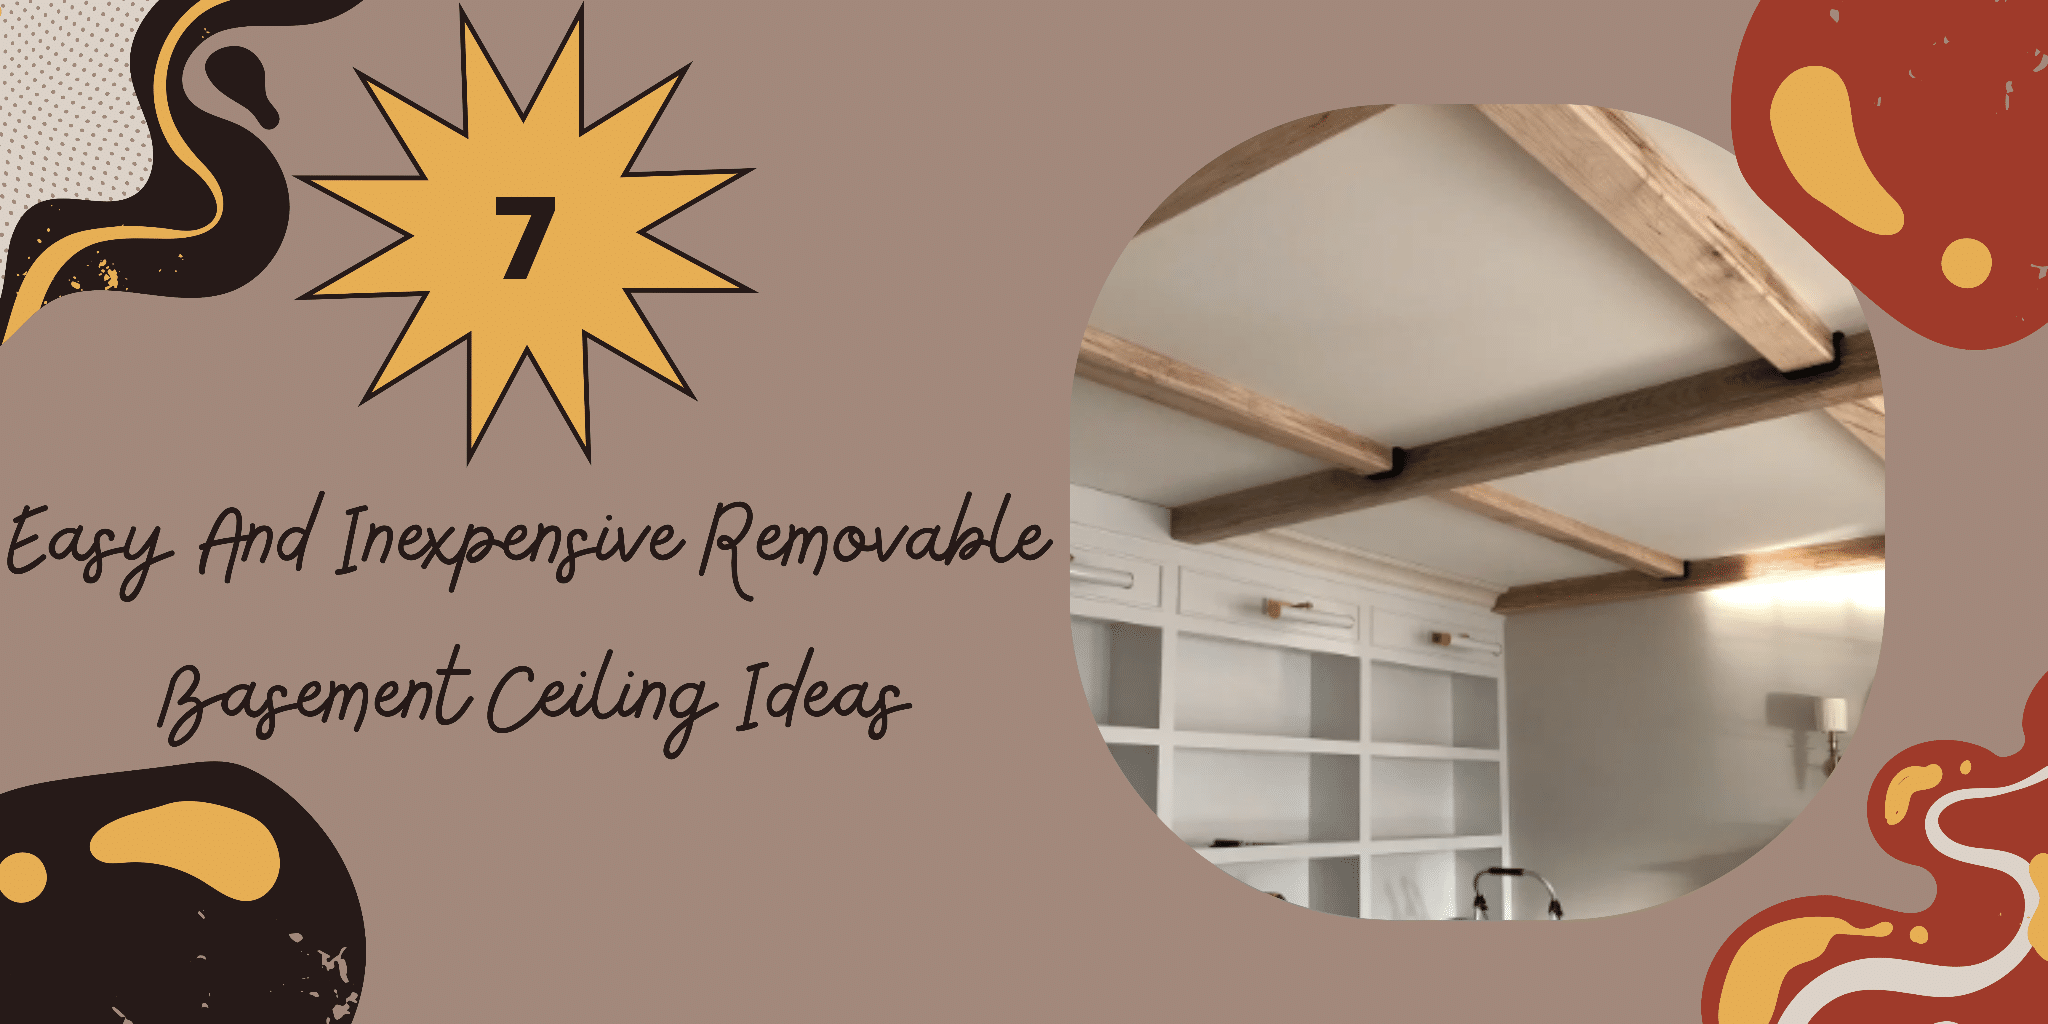 7 Easy And Inexpensive Removable Basement Ceiling Ideas - Guyabouthome